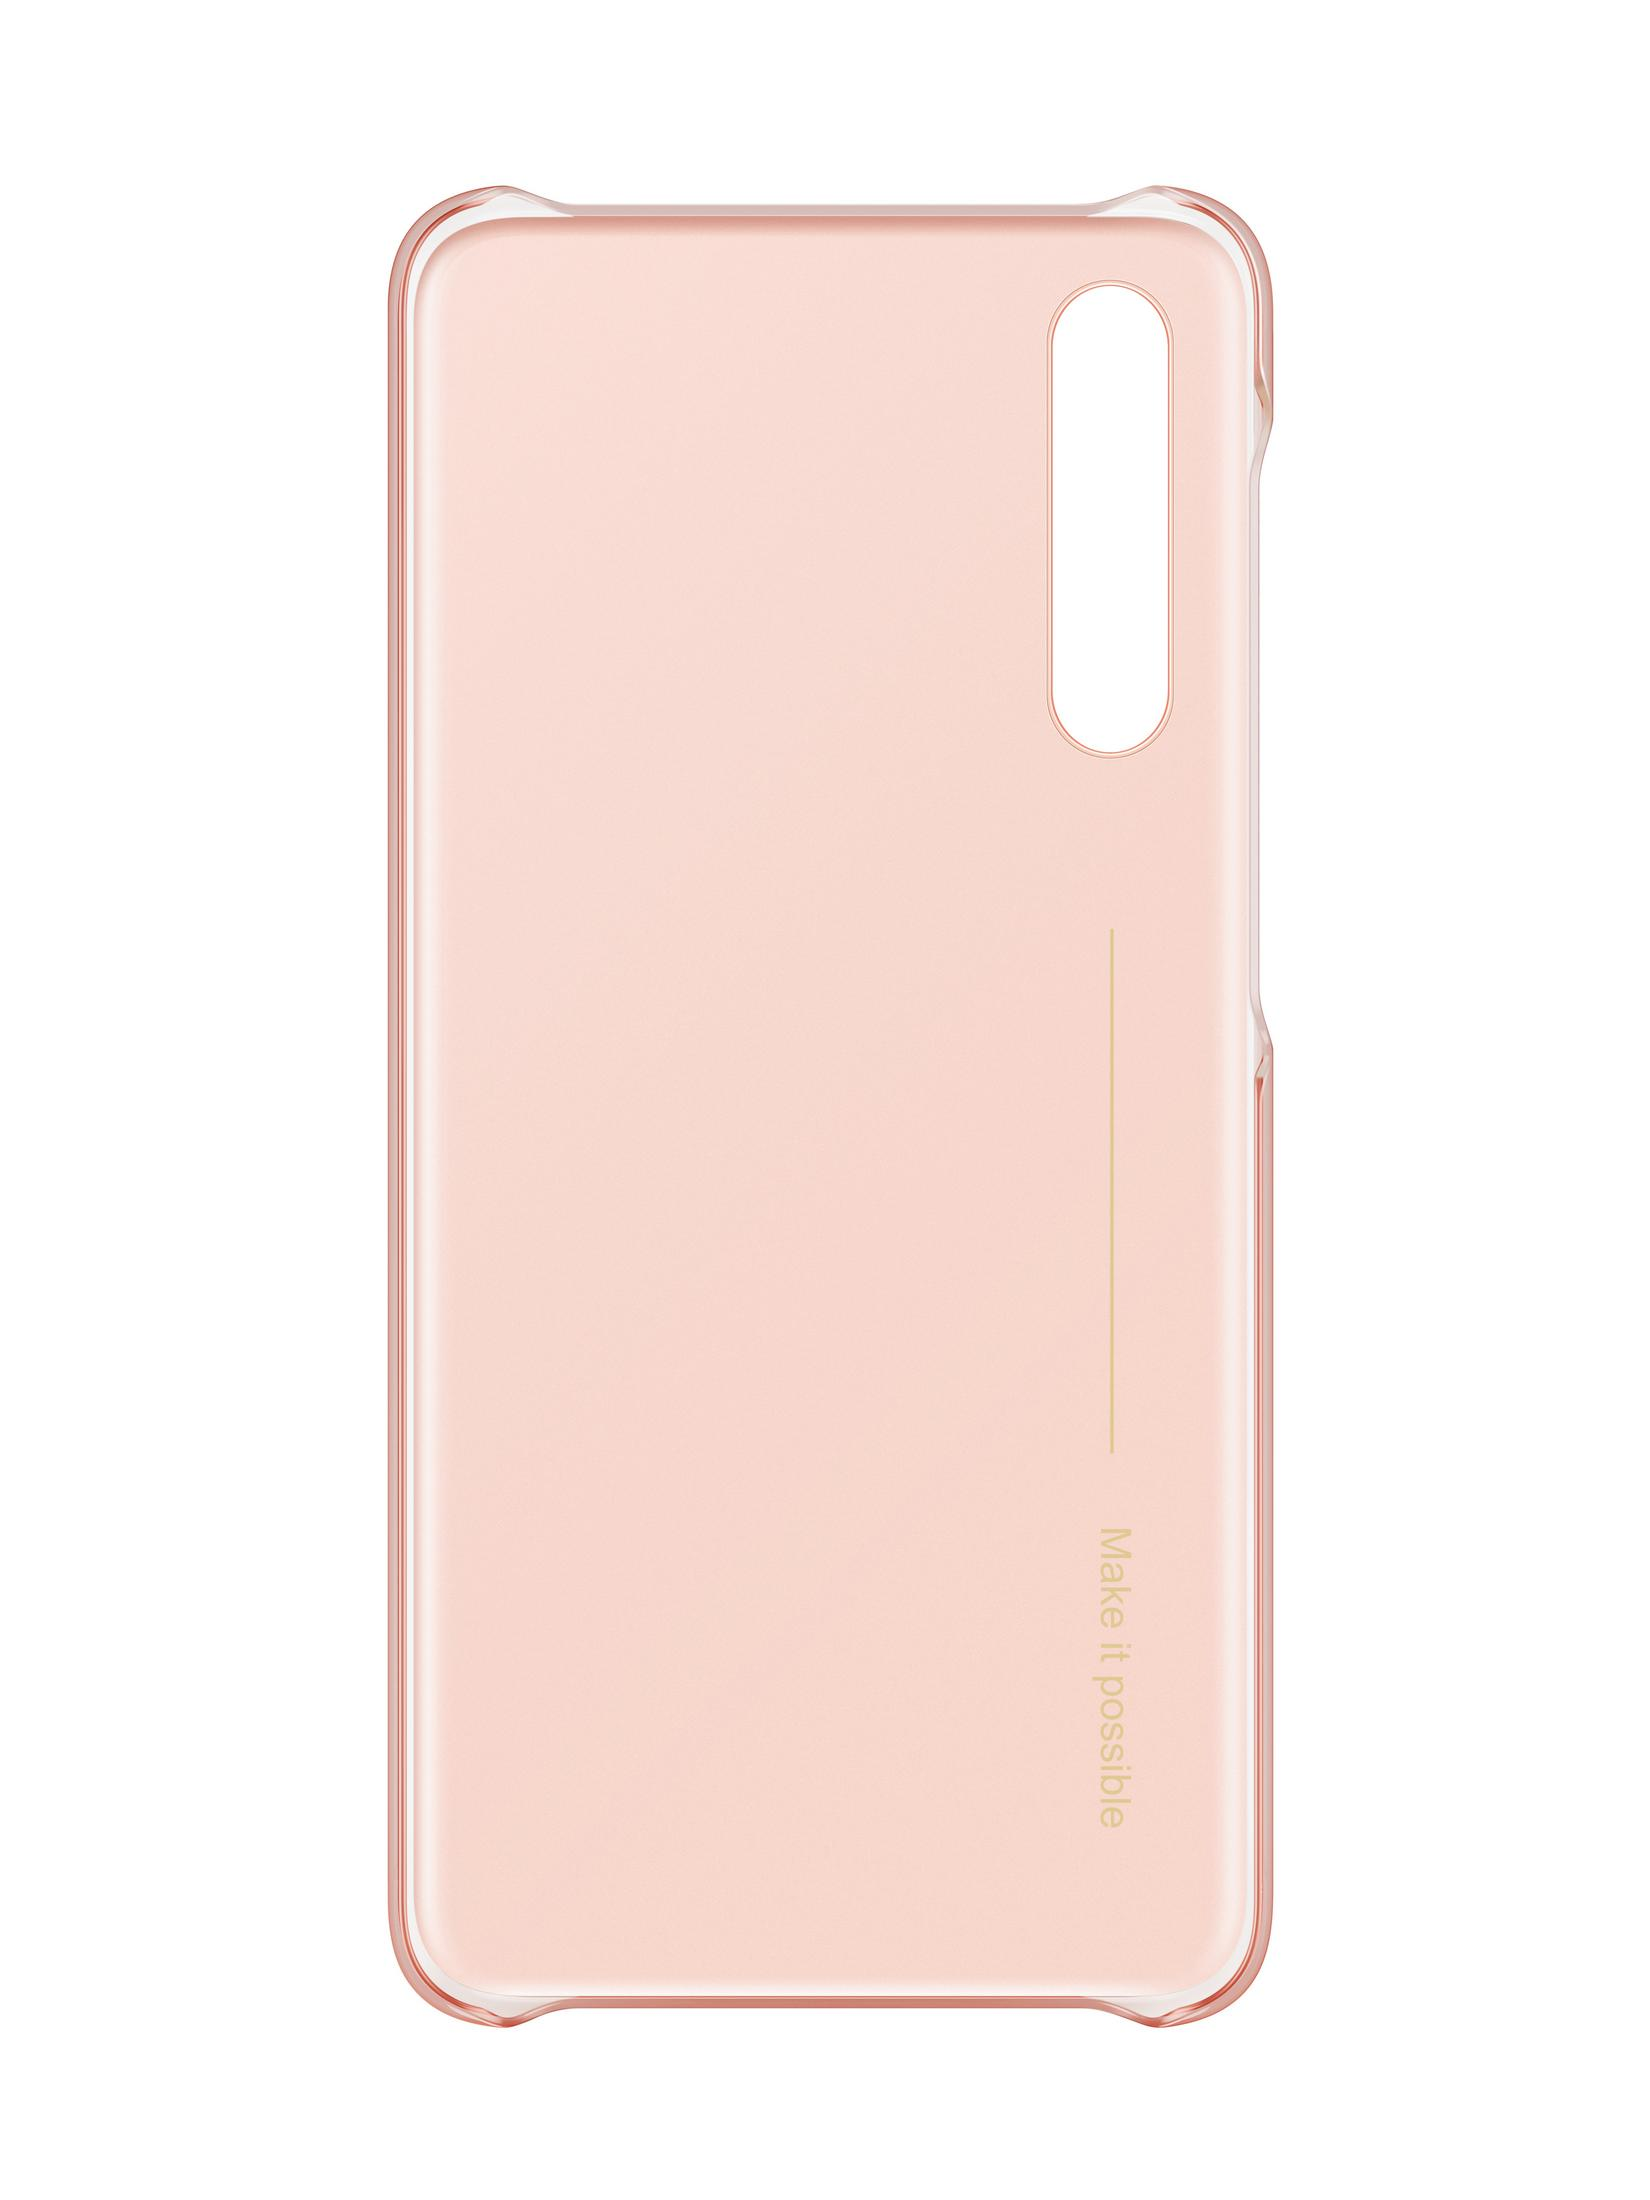 HUAWEI 51992376 P20 P20 Pro, PRO PINK, Backcover, Pink COLOR Huawei, CASE